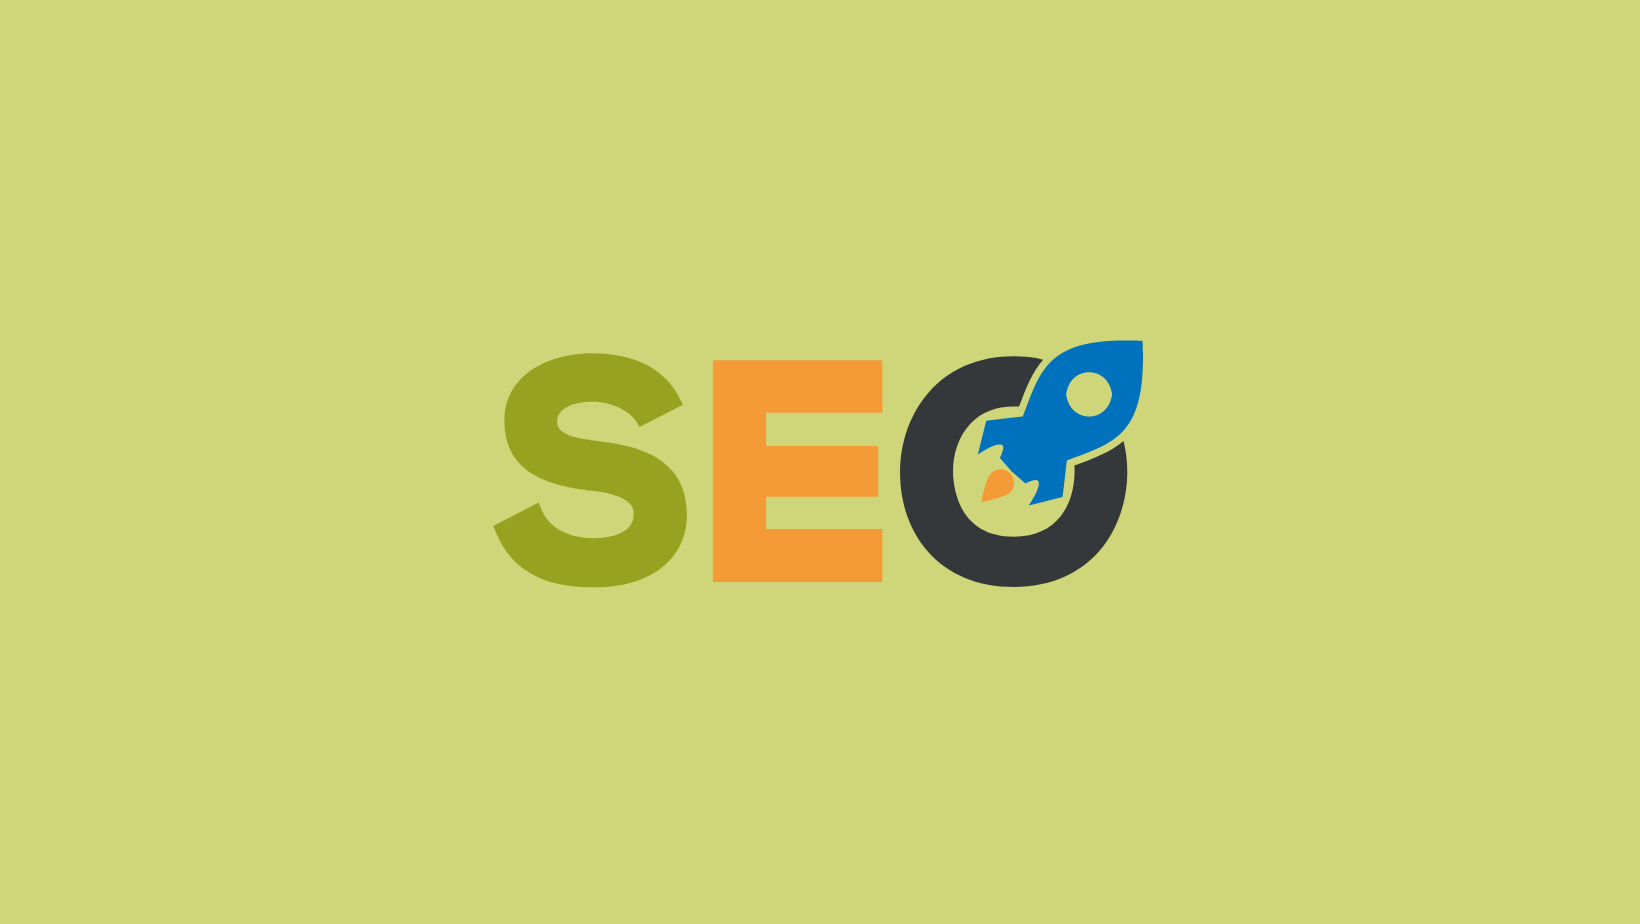 SEO for an advertising company